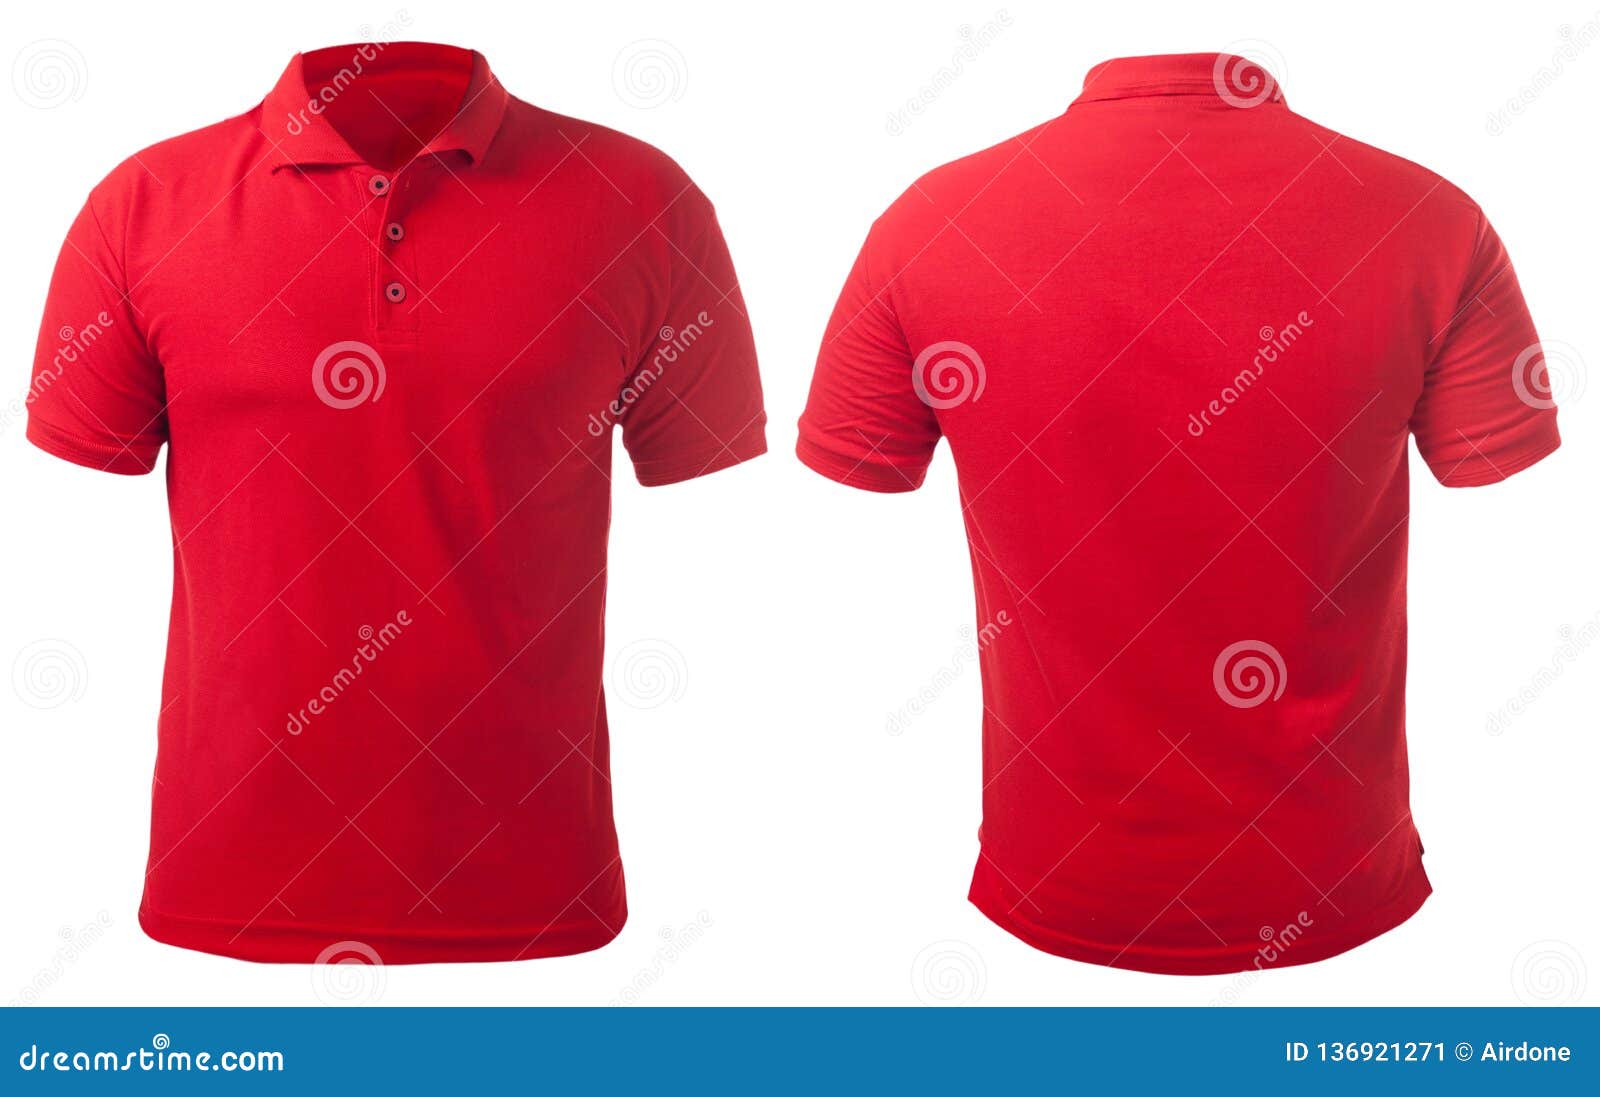 Download Red Collared Shirt Design Template Stock Image - Image of ...